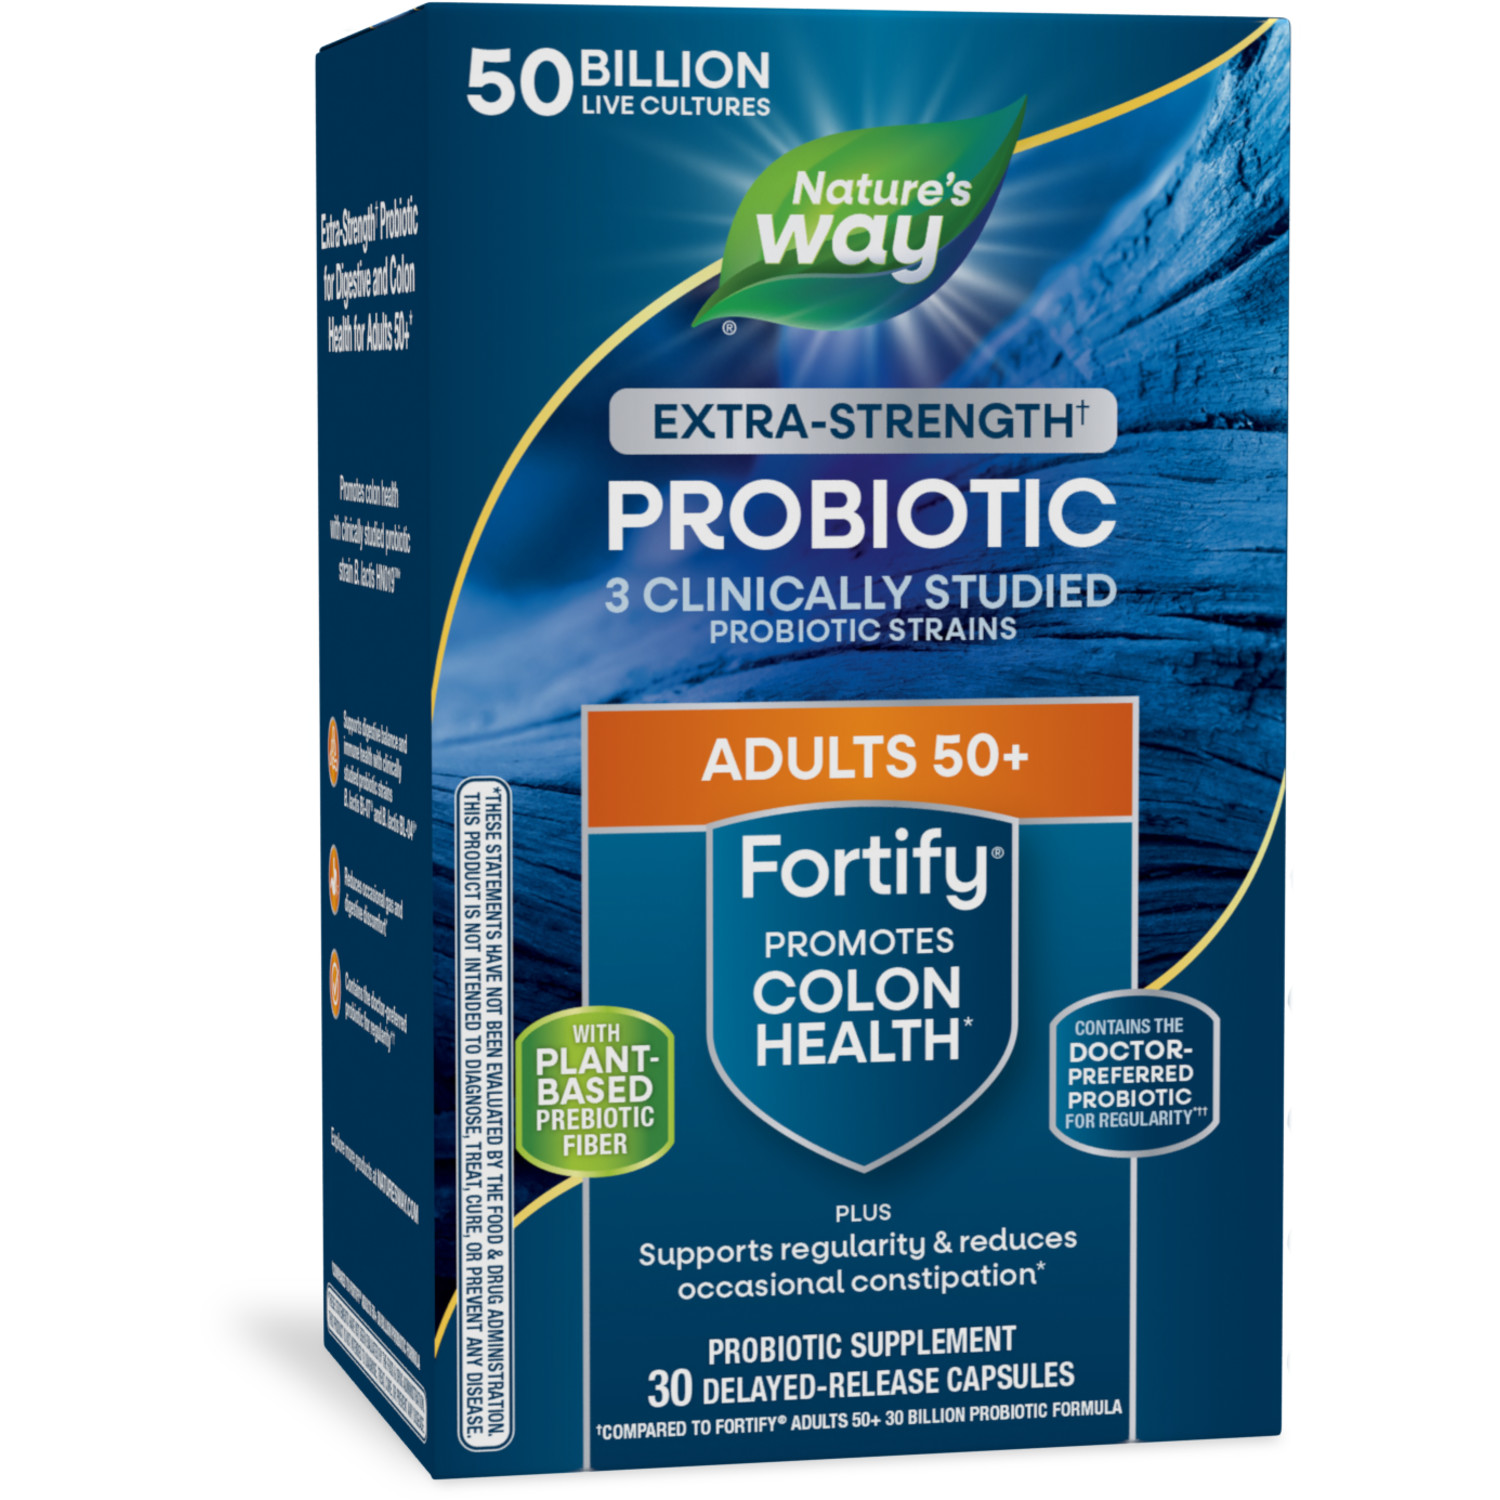 Nature's Way Fortify Extra Strength† Probiotic Age 50+ Capsules, 50 Billion CFU, Unisex, 30 Count - image 1 of 8